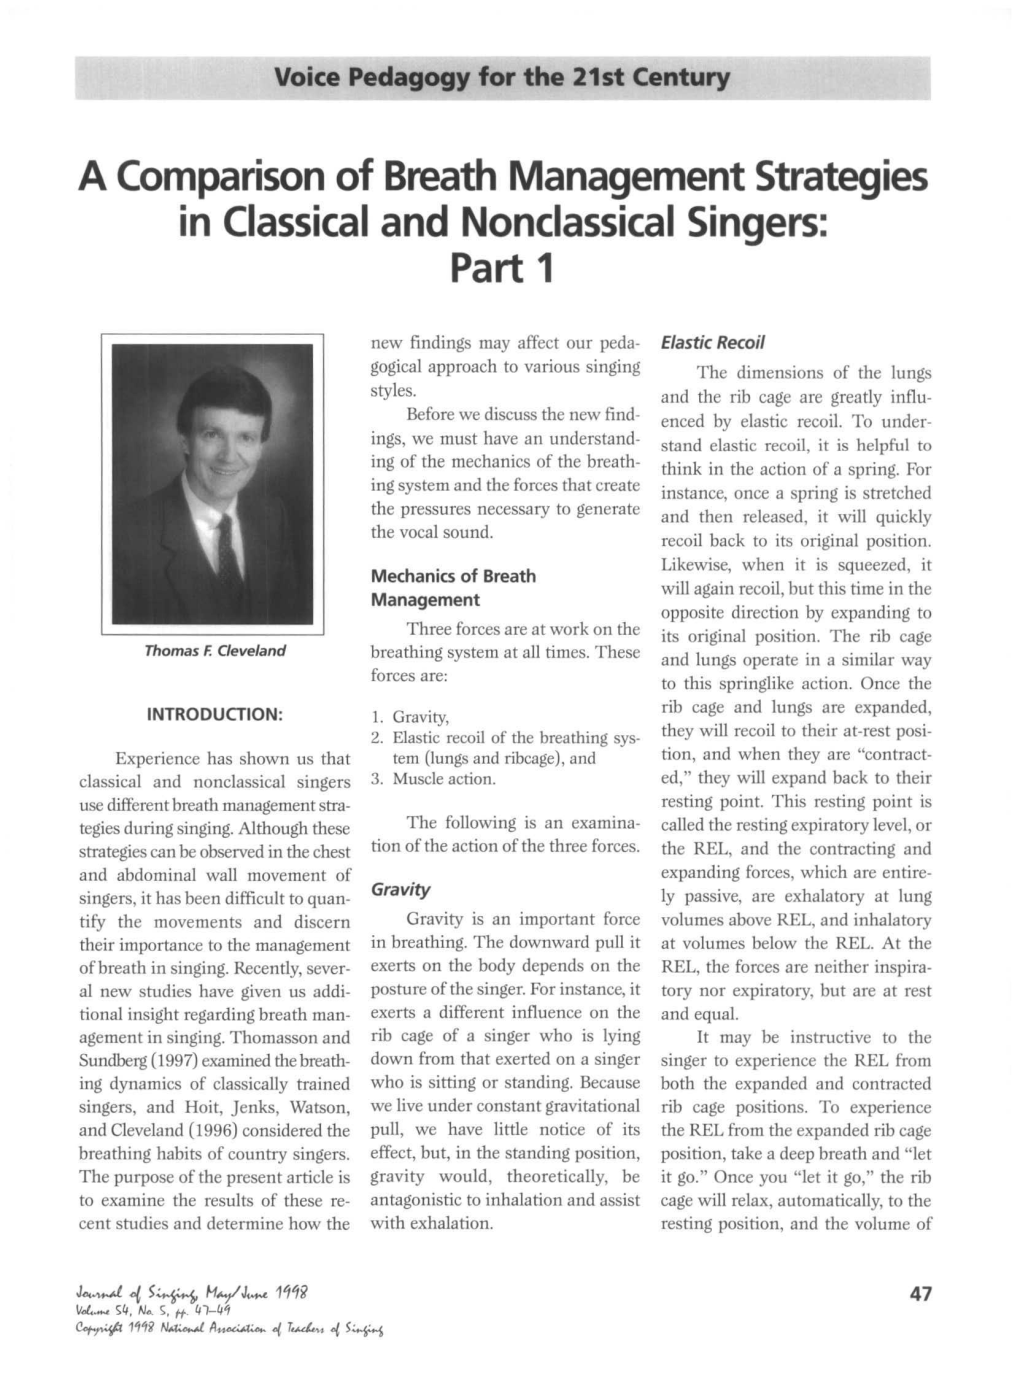 A Comparison of Breath Management Strategies in Classical and Nonclassical Singers: Part 1